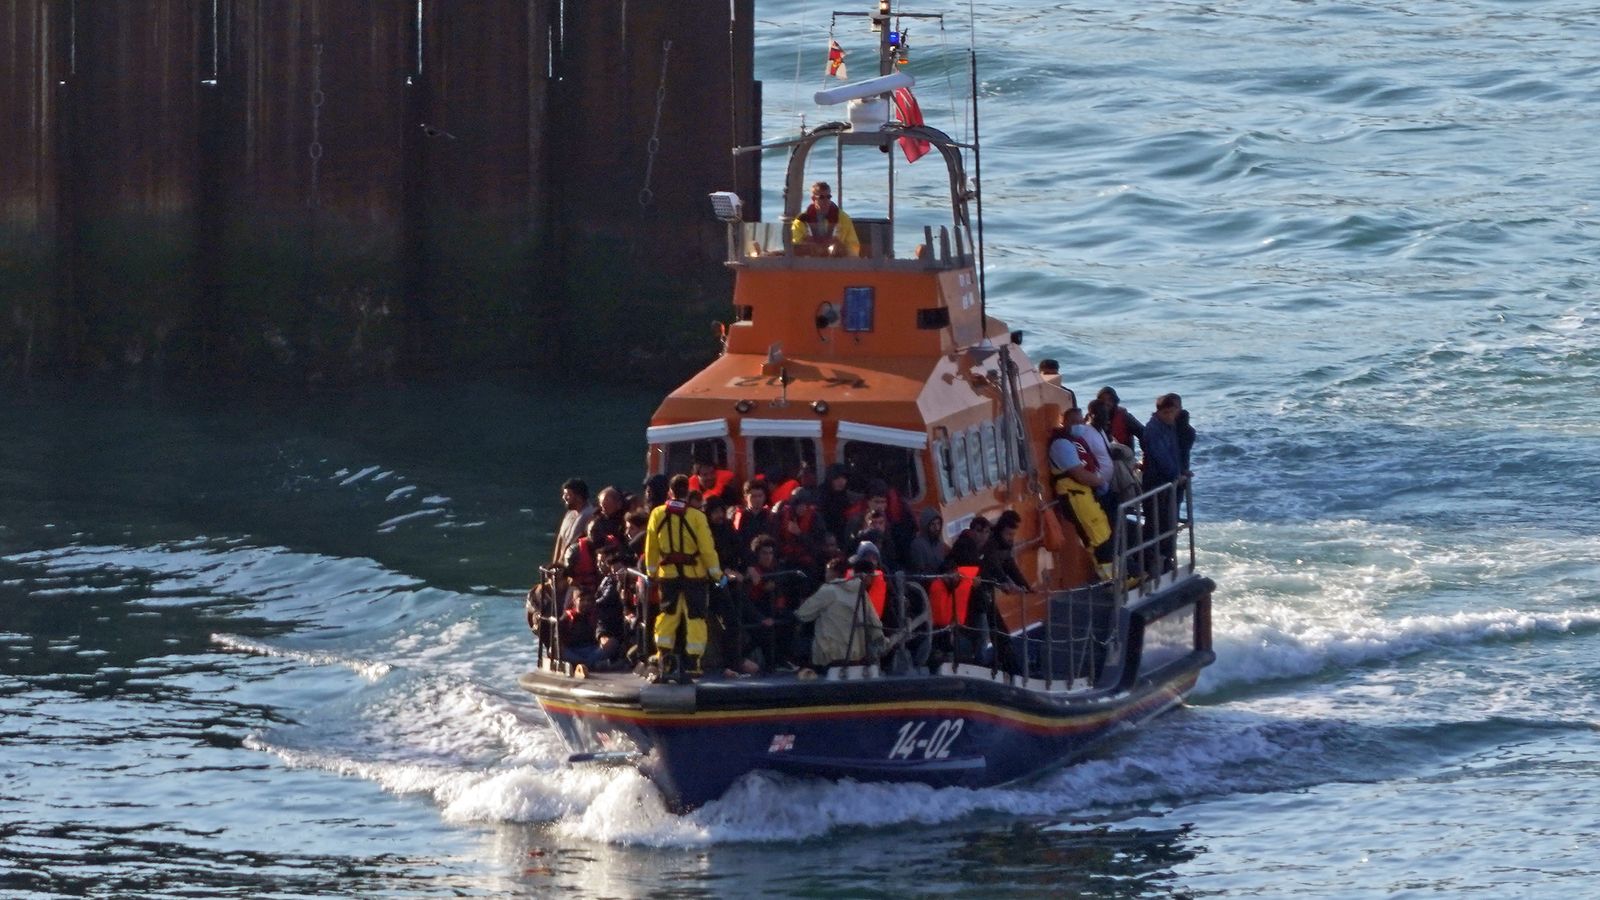 Government defends immigration strategy after Channel tragedy - as Tory MPs criticise 'dysfunctional' Home Office 